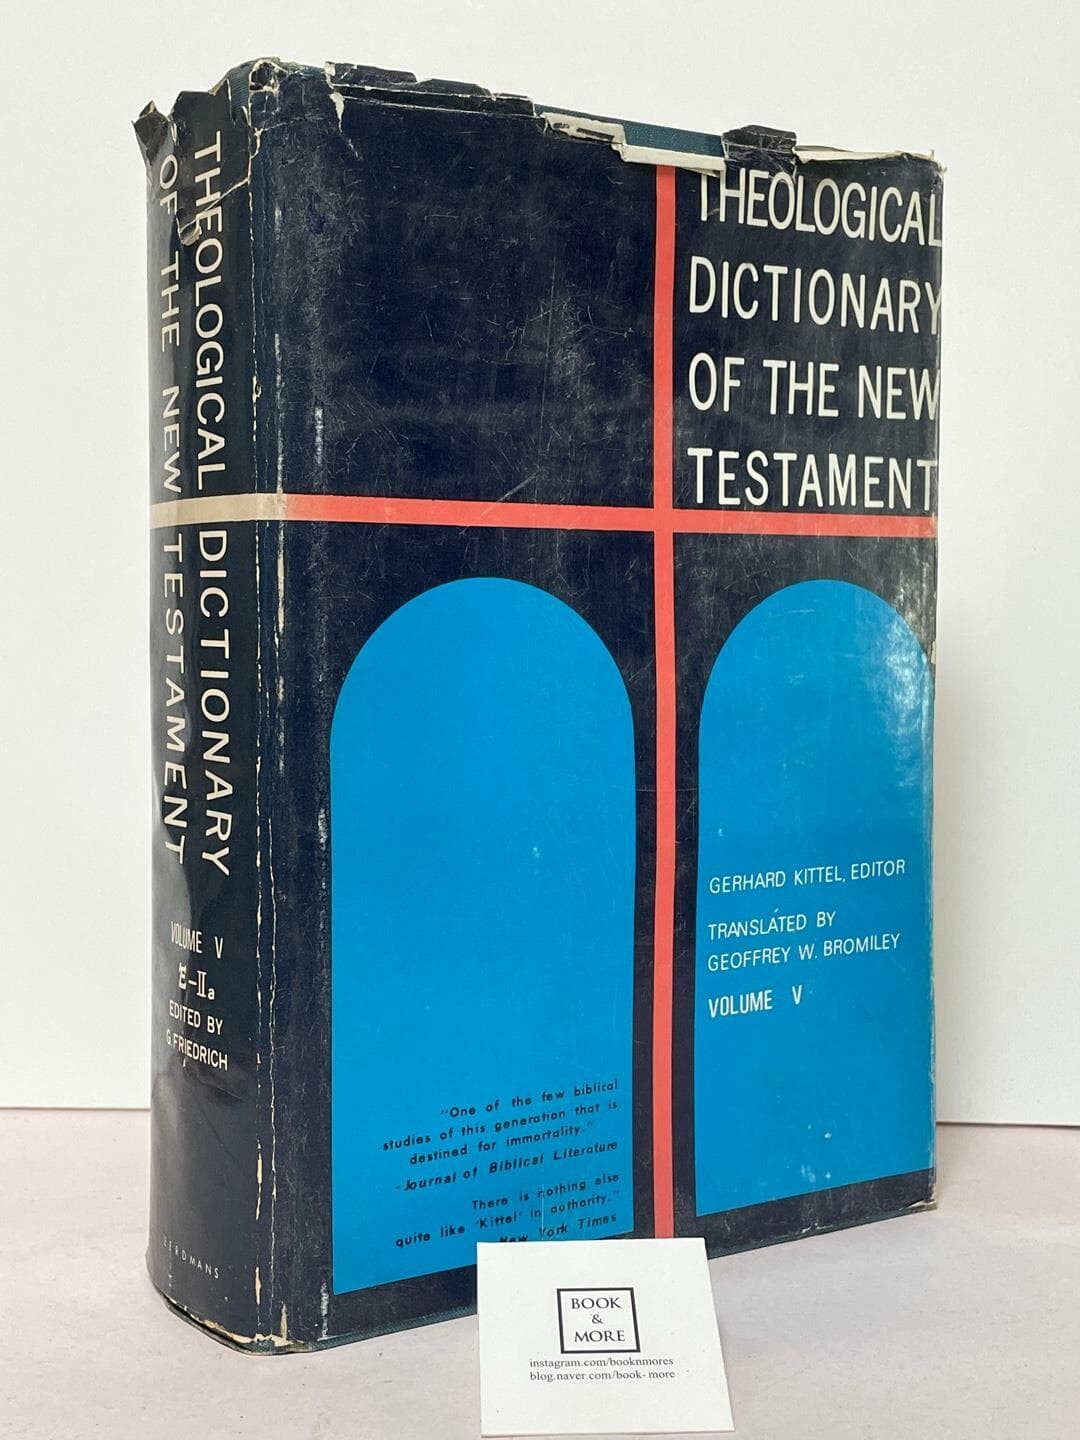 Theological Dictionary of the New Testament. vollume 5 / 중급